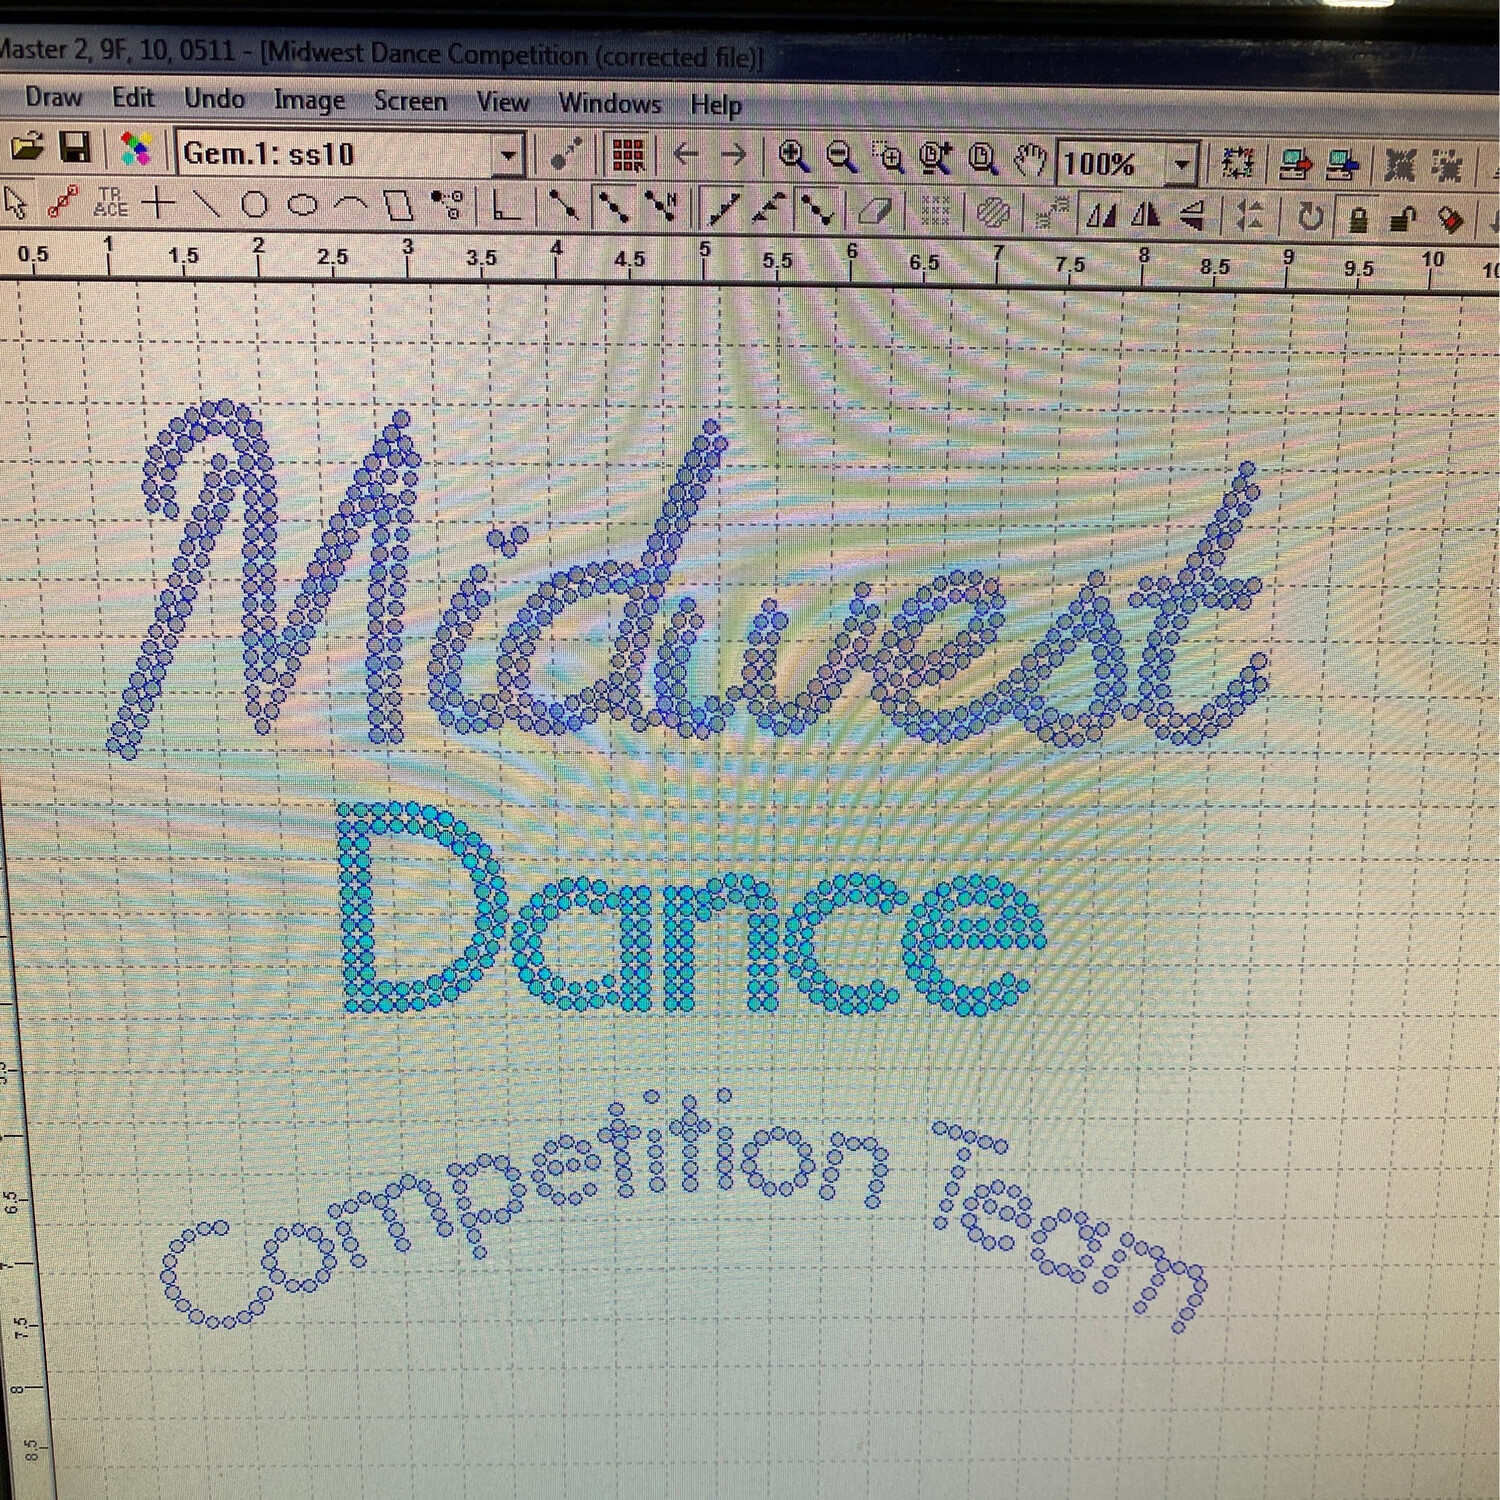 Midwest Dance Comp team